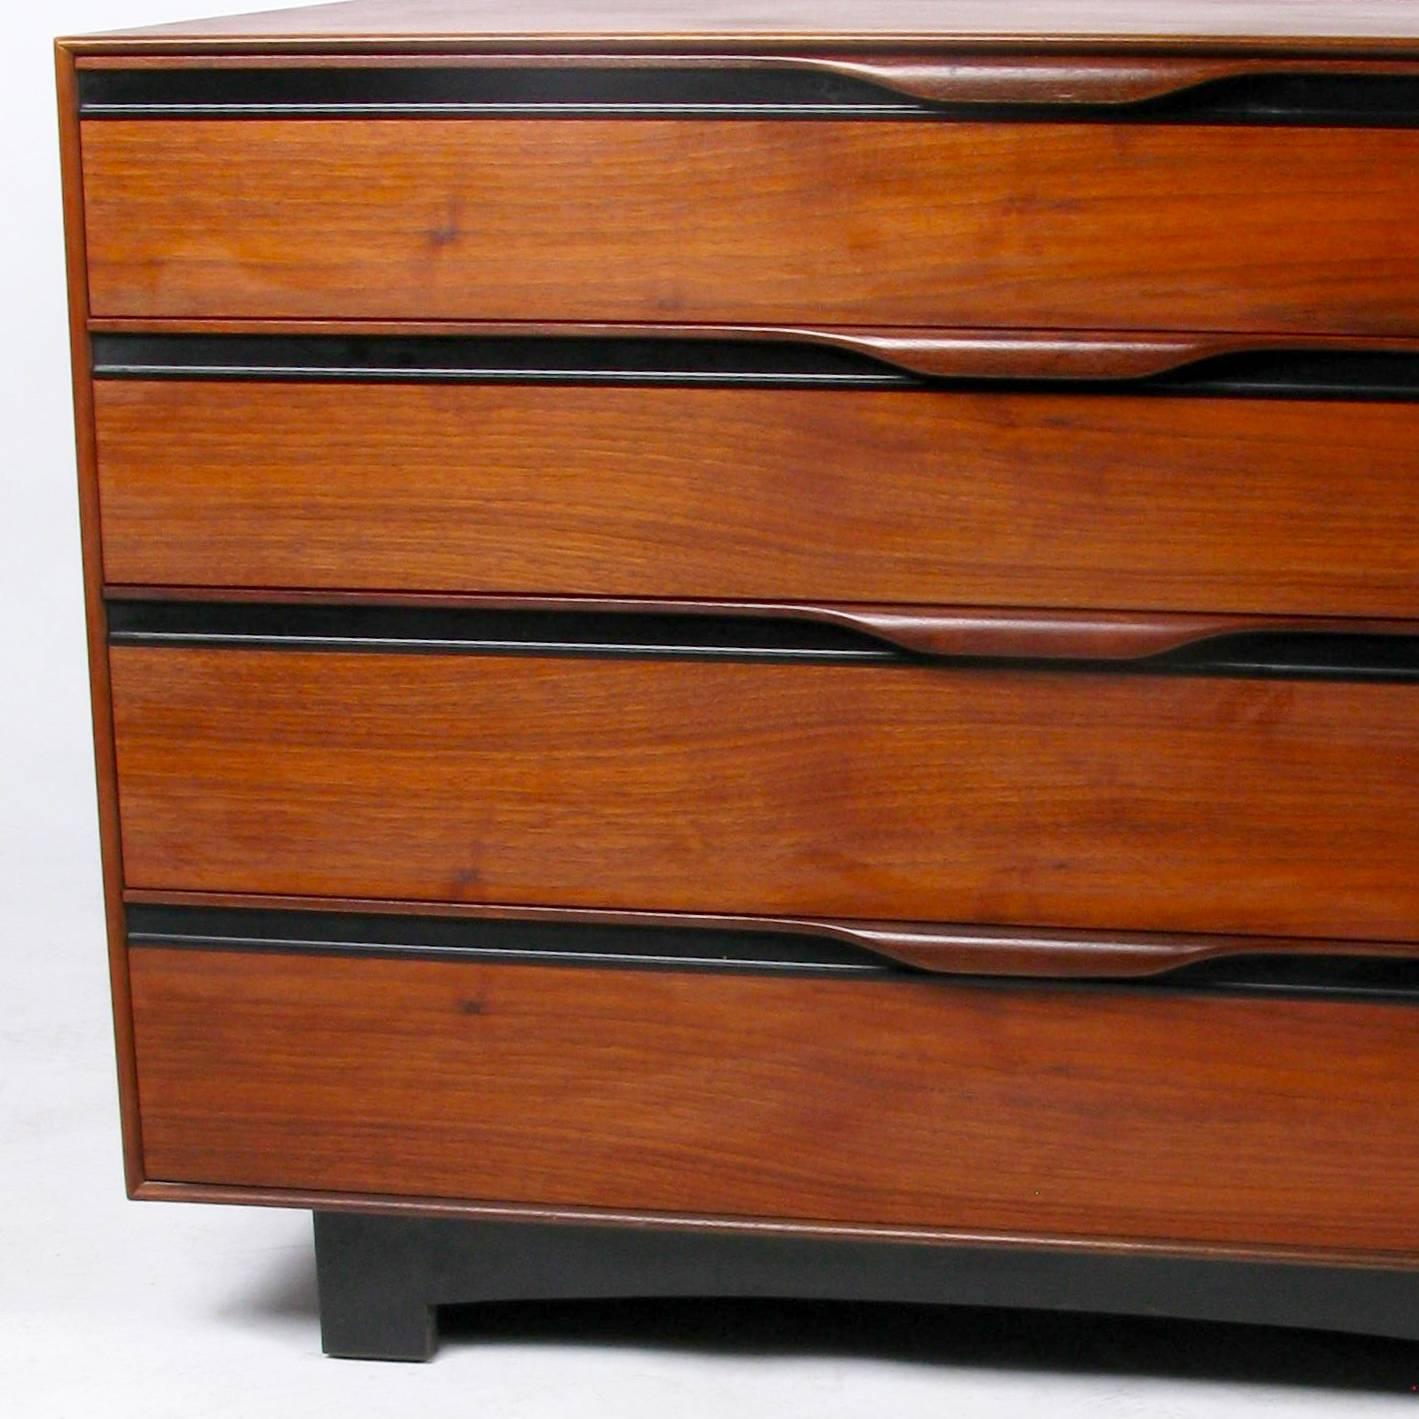 Pair of early 1960s oiled walnut chests designed by John Kapel for Glenn of California, distributed by John Stuart. Would work beautifully together as one long dresser or separately as nightstands.